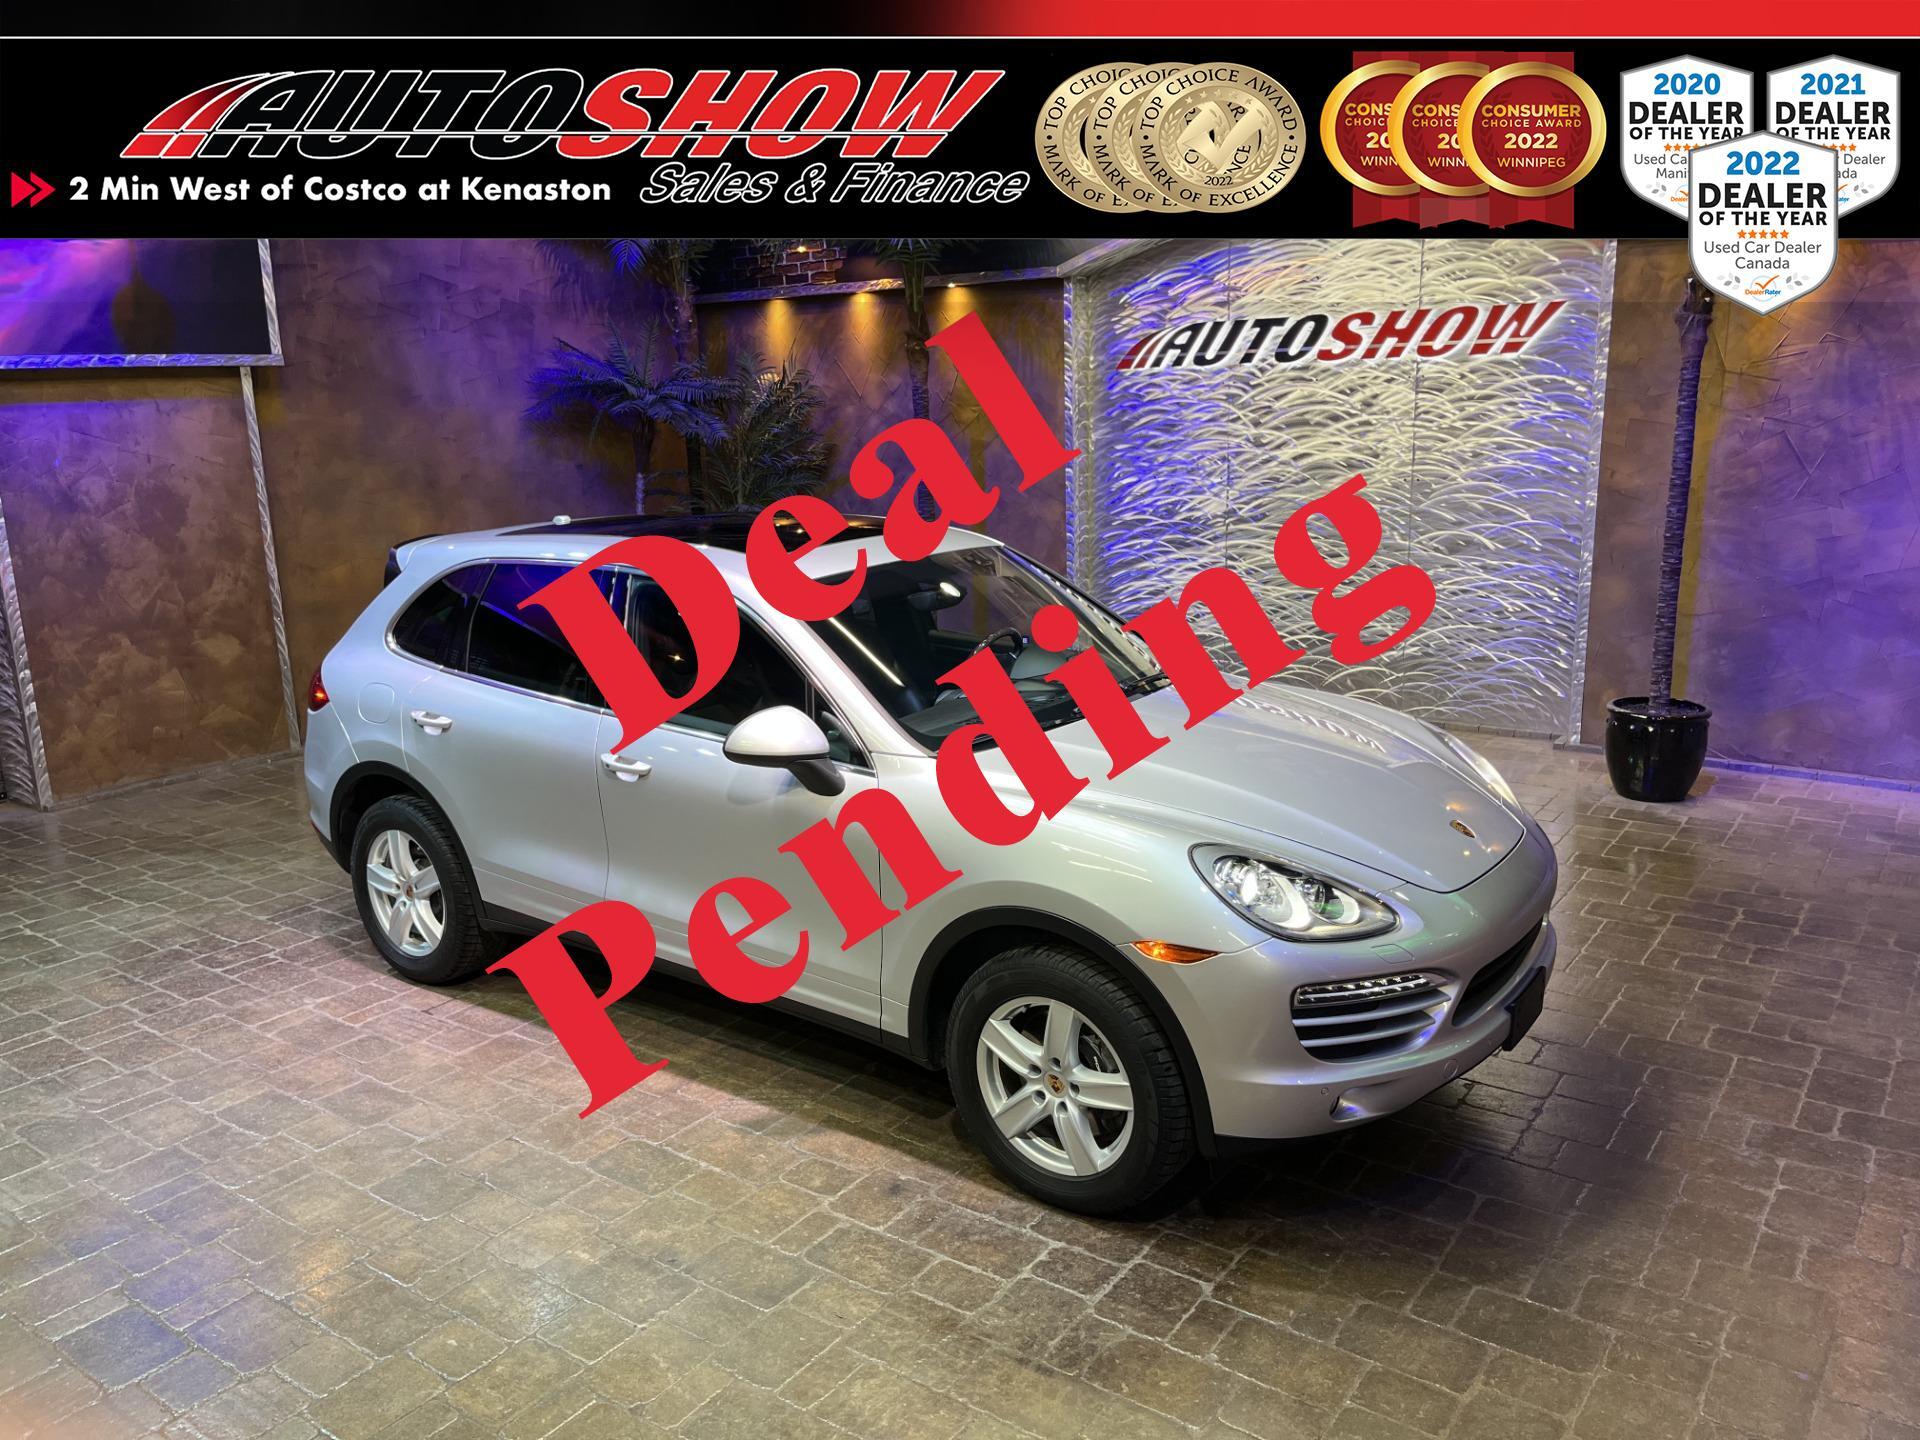 2013 Porsche Cayenne Local w/ Excellent History! Htd/Cooled Leather, Pa